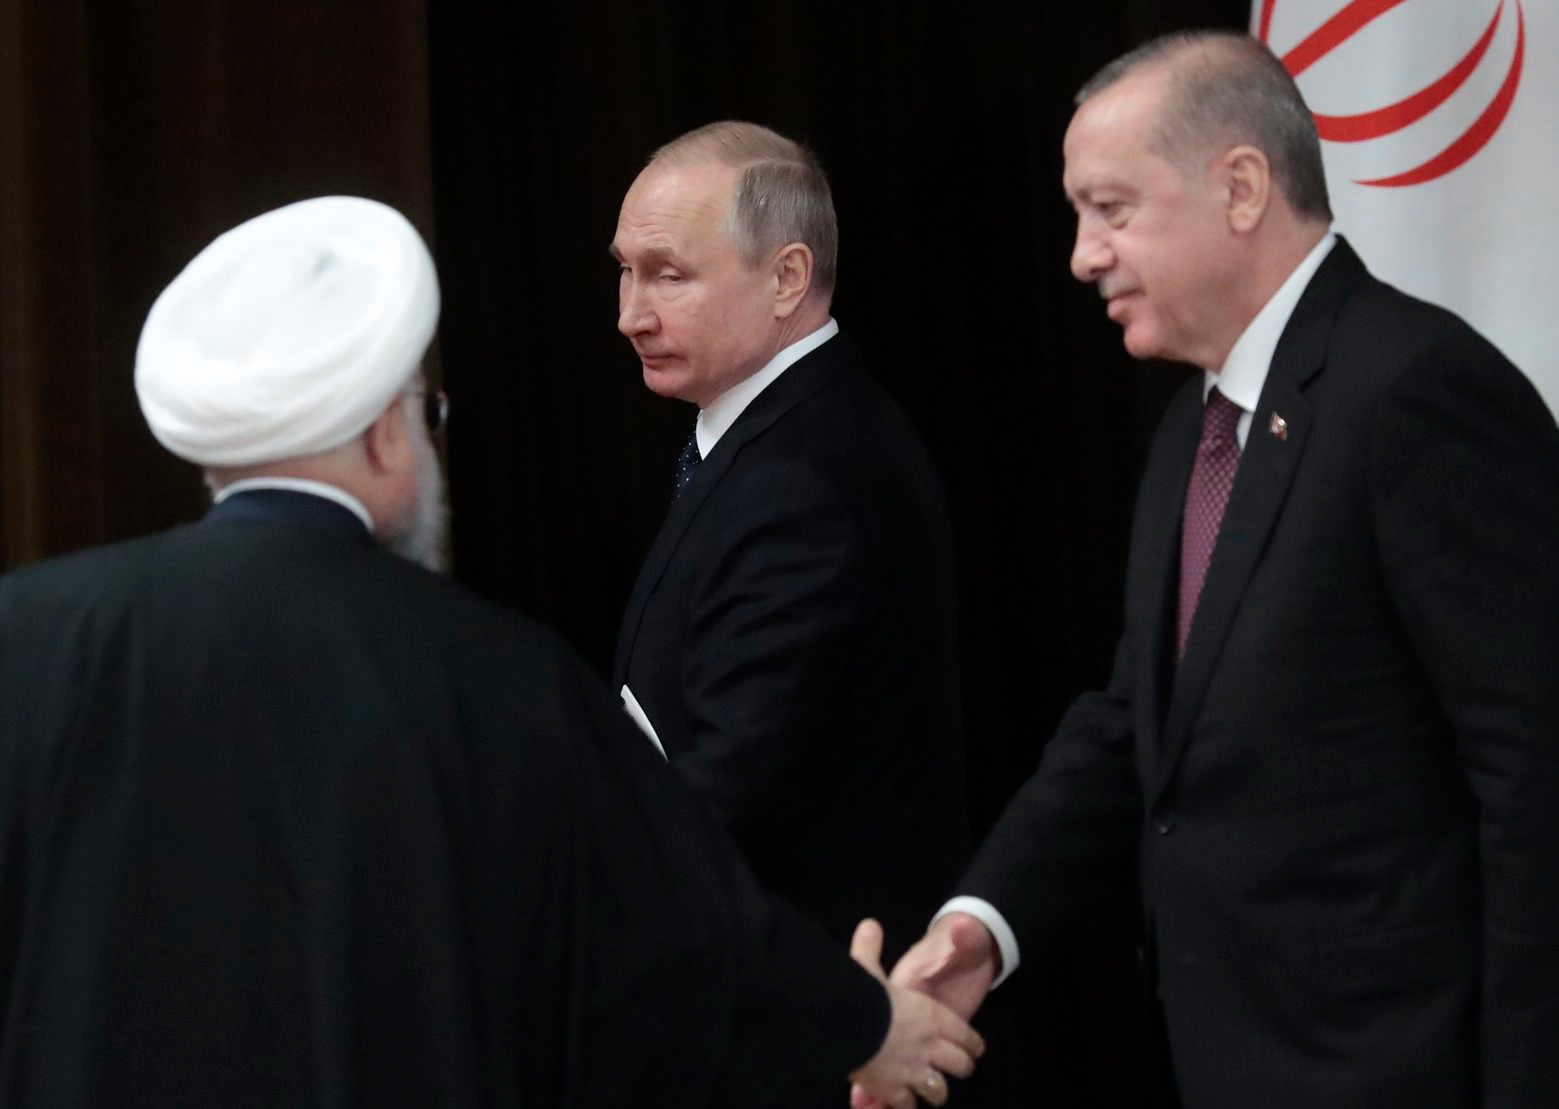 Russian President Vladimir Putin, center, Iranian President Hassan Rouhani, left, and Turkish President Recep Tayyip Erdogan leave a news conference after the talks in the Bocharov Ruchei residence in the Black Sea resort of Sochi, Russia, Thursday, Feb. 14, 2019. Putin is hosting the leaders of Turkey and Iran for talks about a Syria peace settlement as expectations mount for an imminent and final defeat of the Islamic State group. (Sergei Chirikov/Pool Photo via AP) Russia Syria